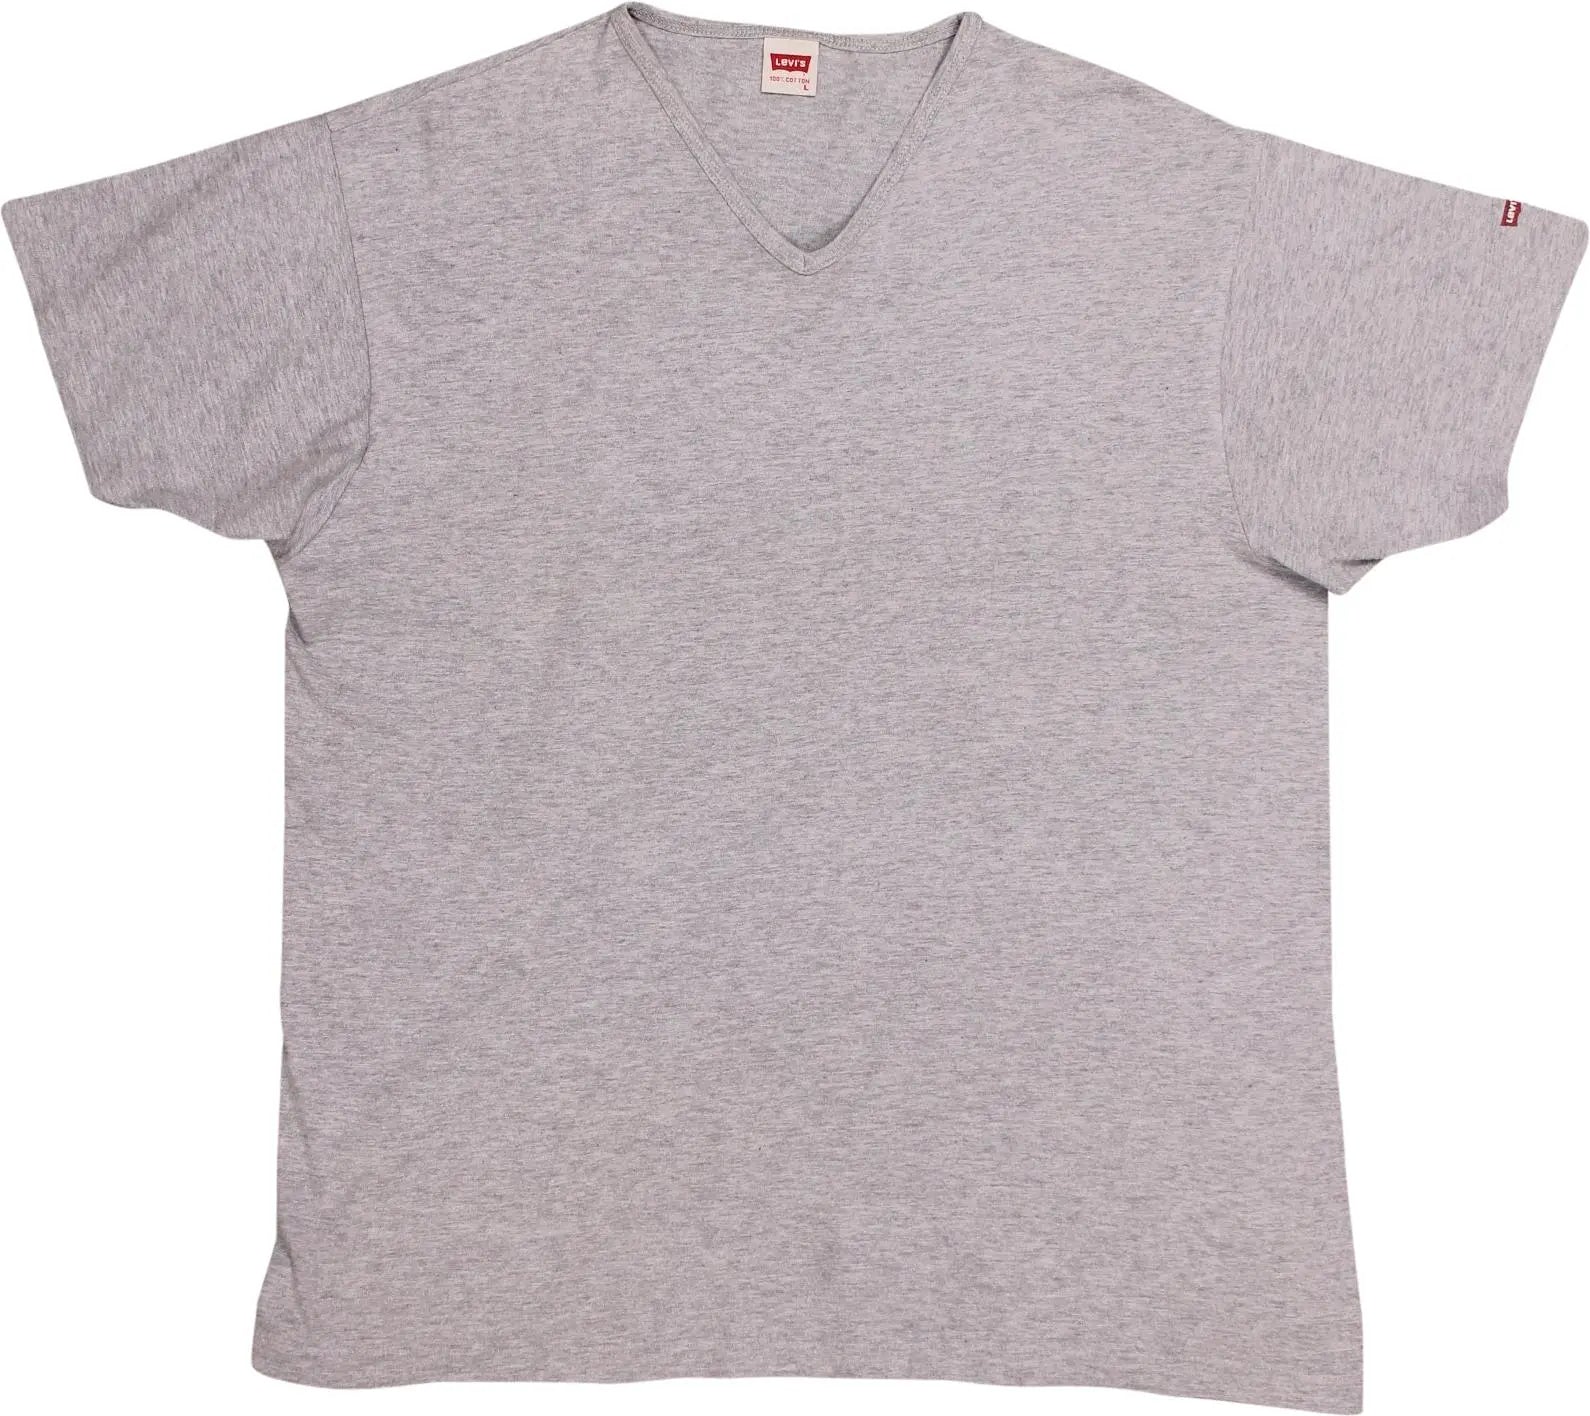 Levi's - Grey V-Neck T-shirt by Levi's- ThriftTale.com - Vintage and second handclothing